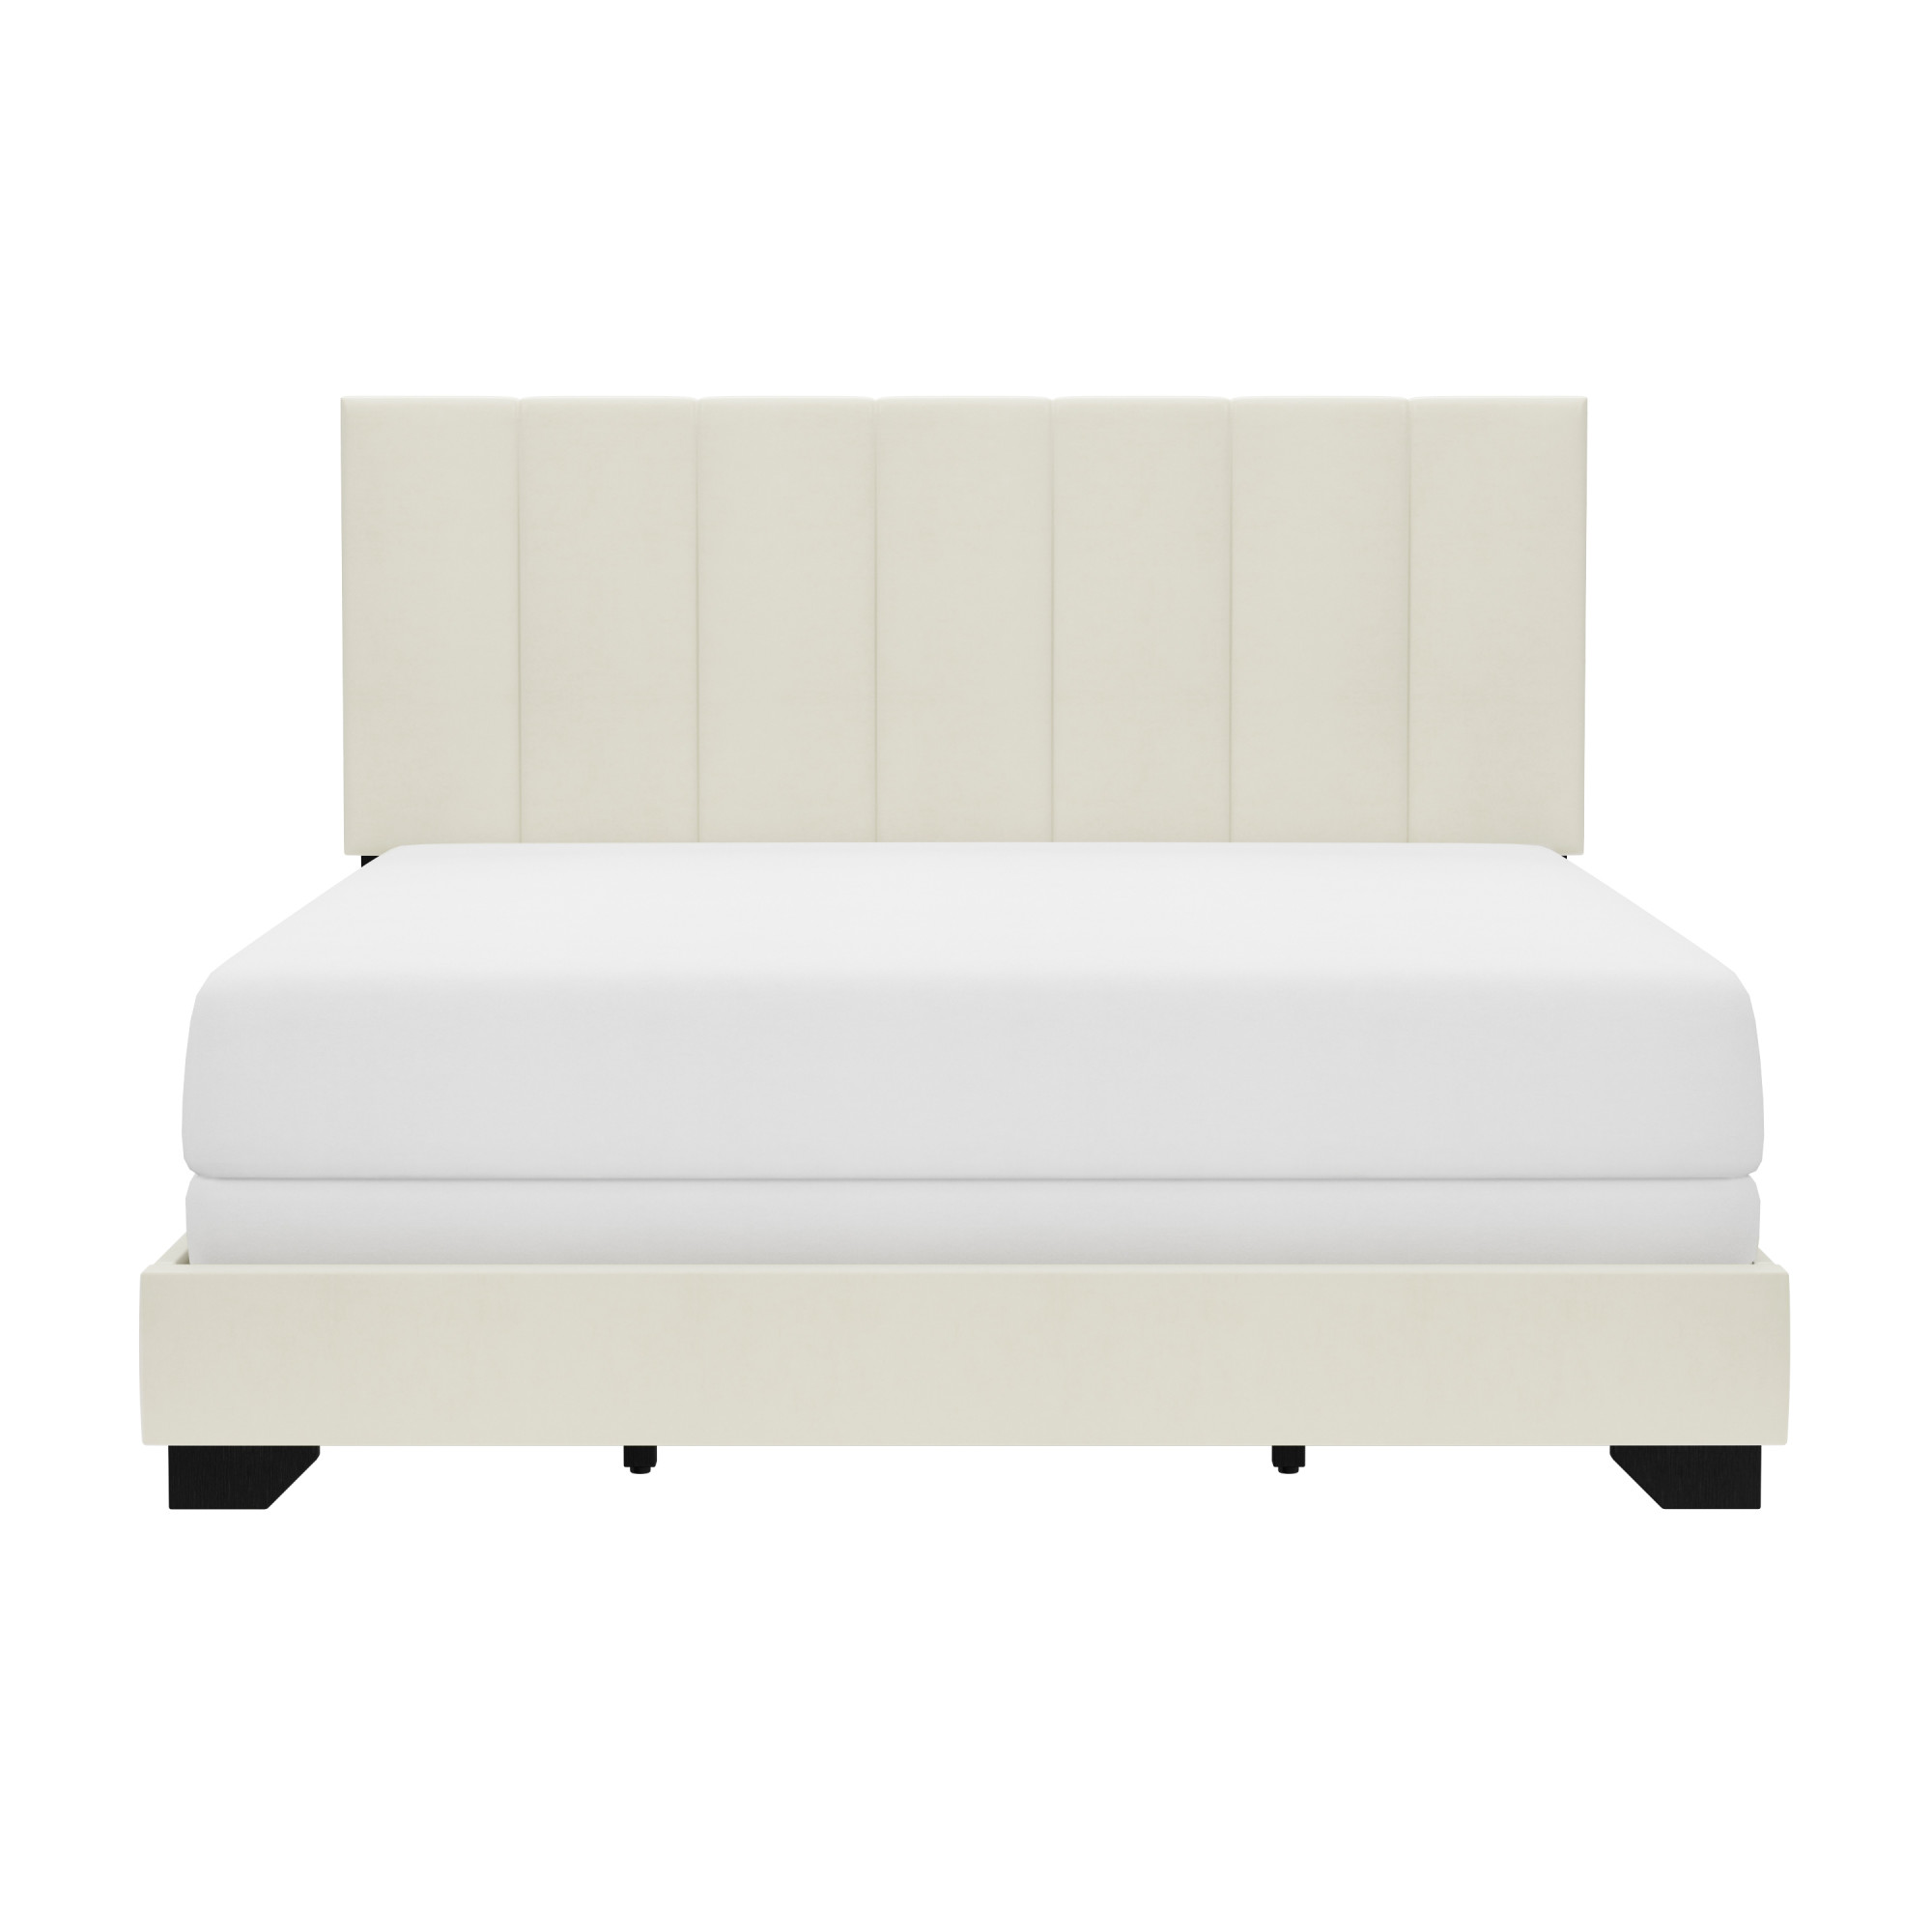 Reece Channel Stitched Upholstered Queen Bed, Ivory, by Hillsdale Living Essentials - image 2 of 17